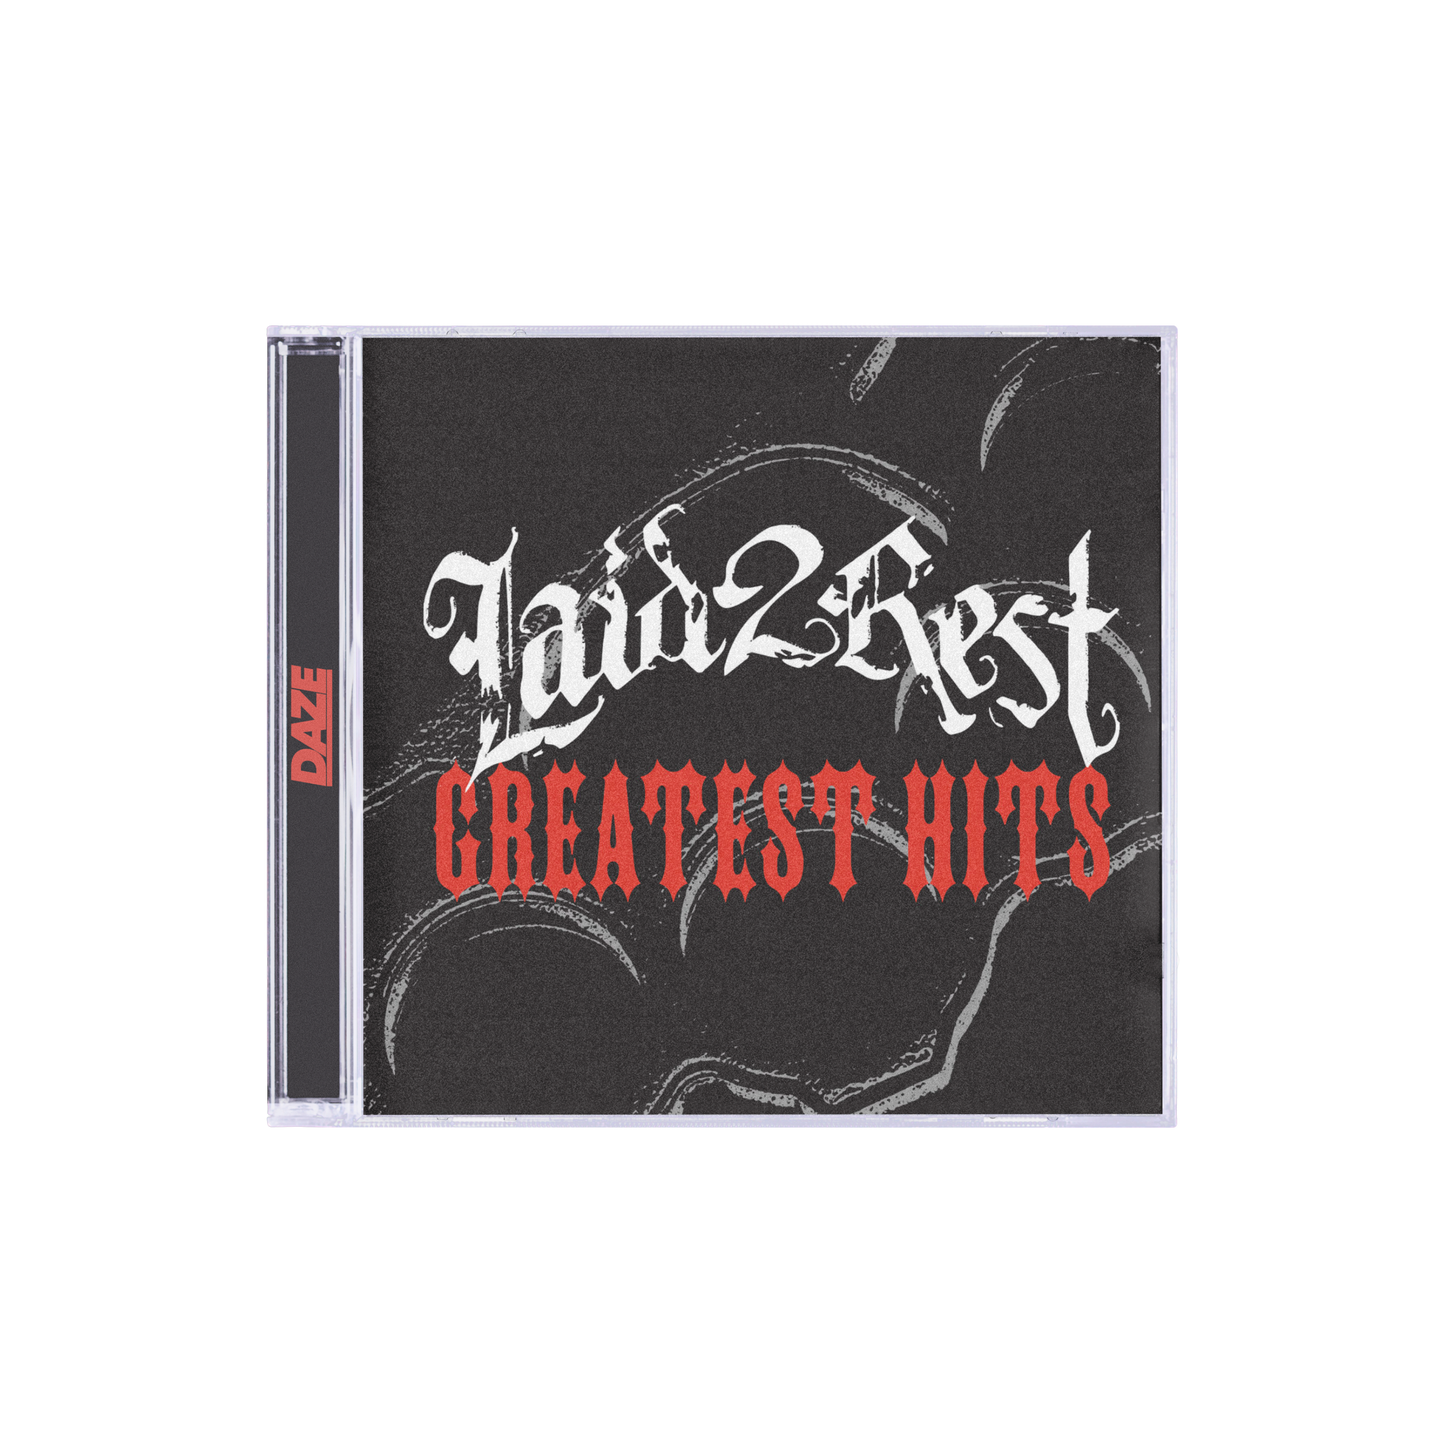 Laid 2 Rest "Greatest Hits" CD